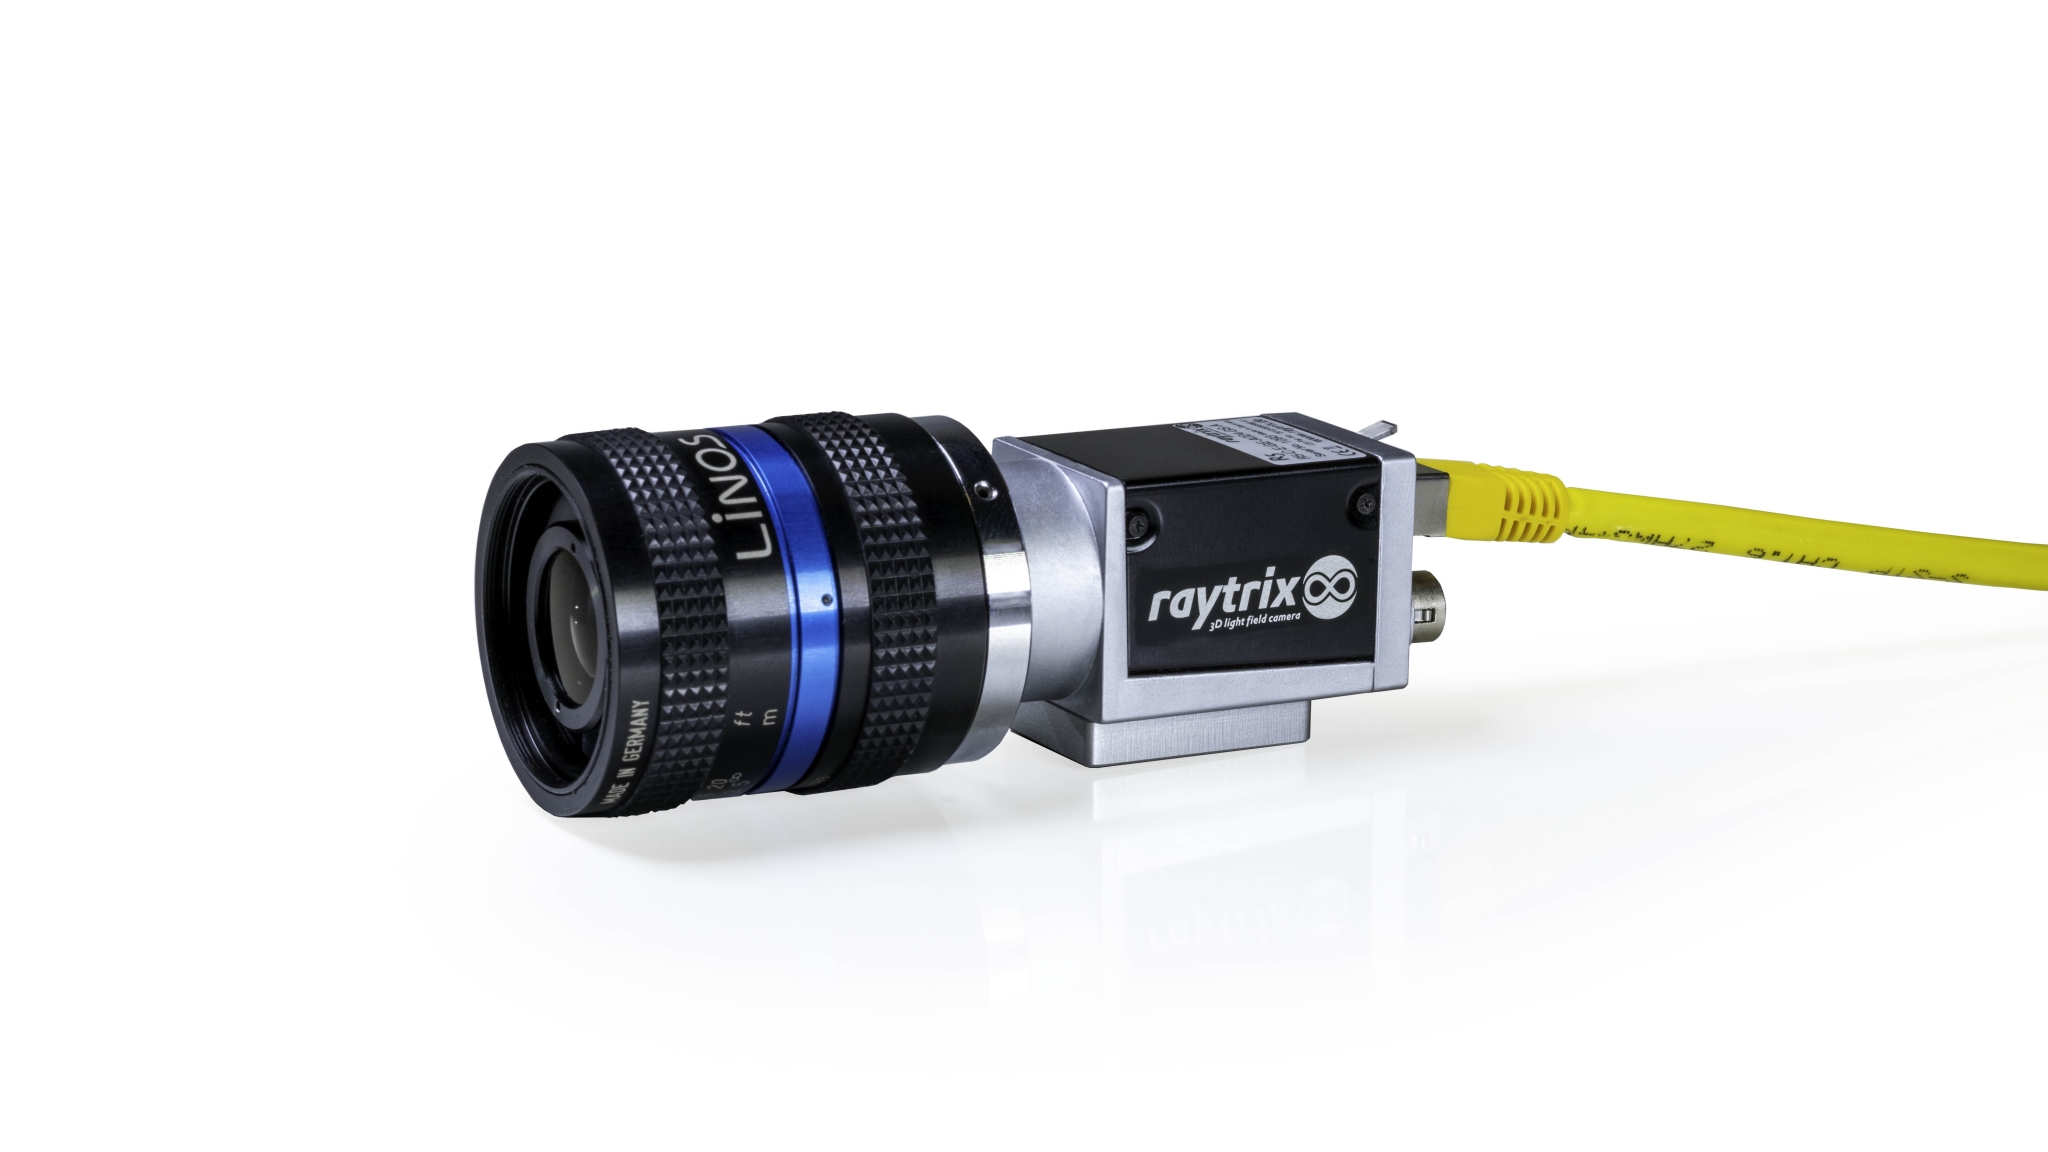 The Raytrix R12 multi-focus plenoptic camera used in our